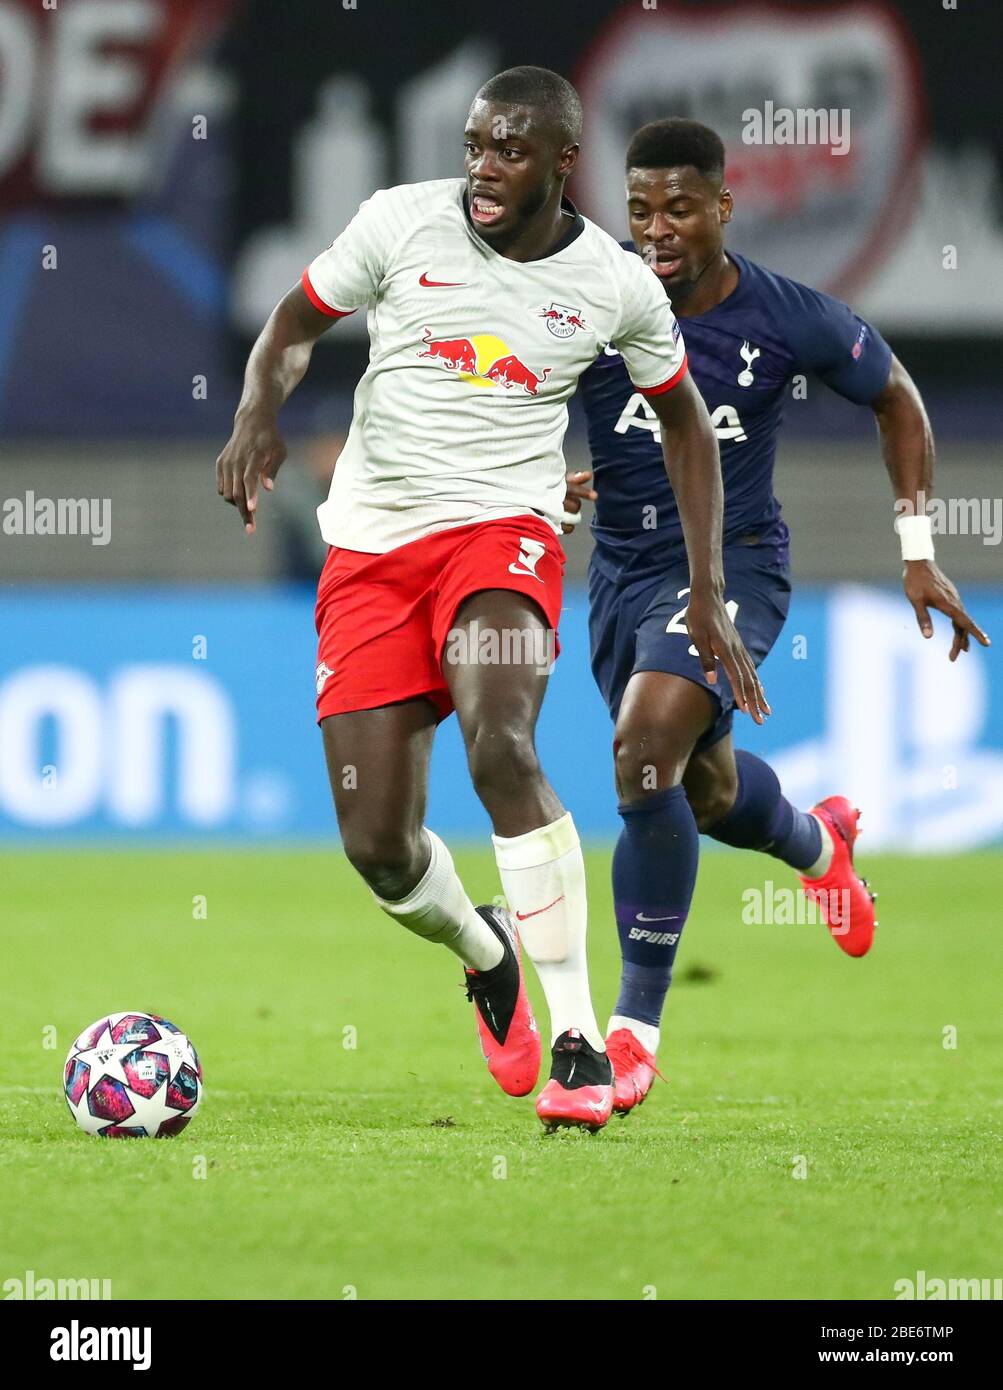 Leipzig, Germany. 10th Mar, 2020. Football: Champions League, Round of 16, RB Leipzig - Tottenham Hotspur in the Red Bull Arena. Leipzig's player Dayot Upamecano (l) and Tottenhams Serge Aurier on the ball. Credit: Jan Woitas/dpa-Zentralbild/dpa/Alamy Live News Stock Photo